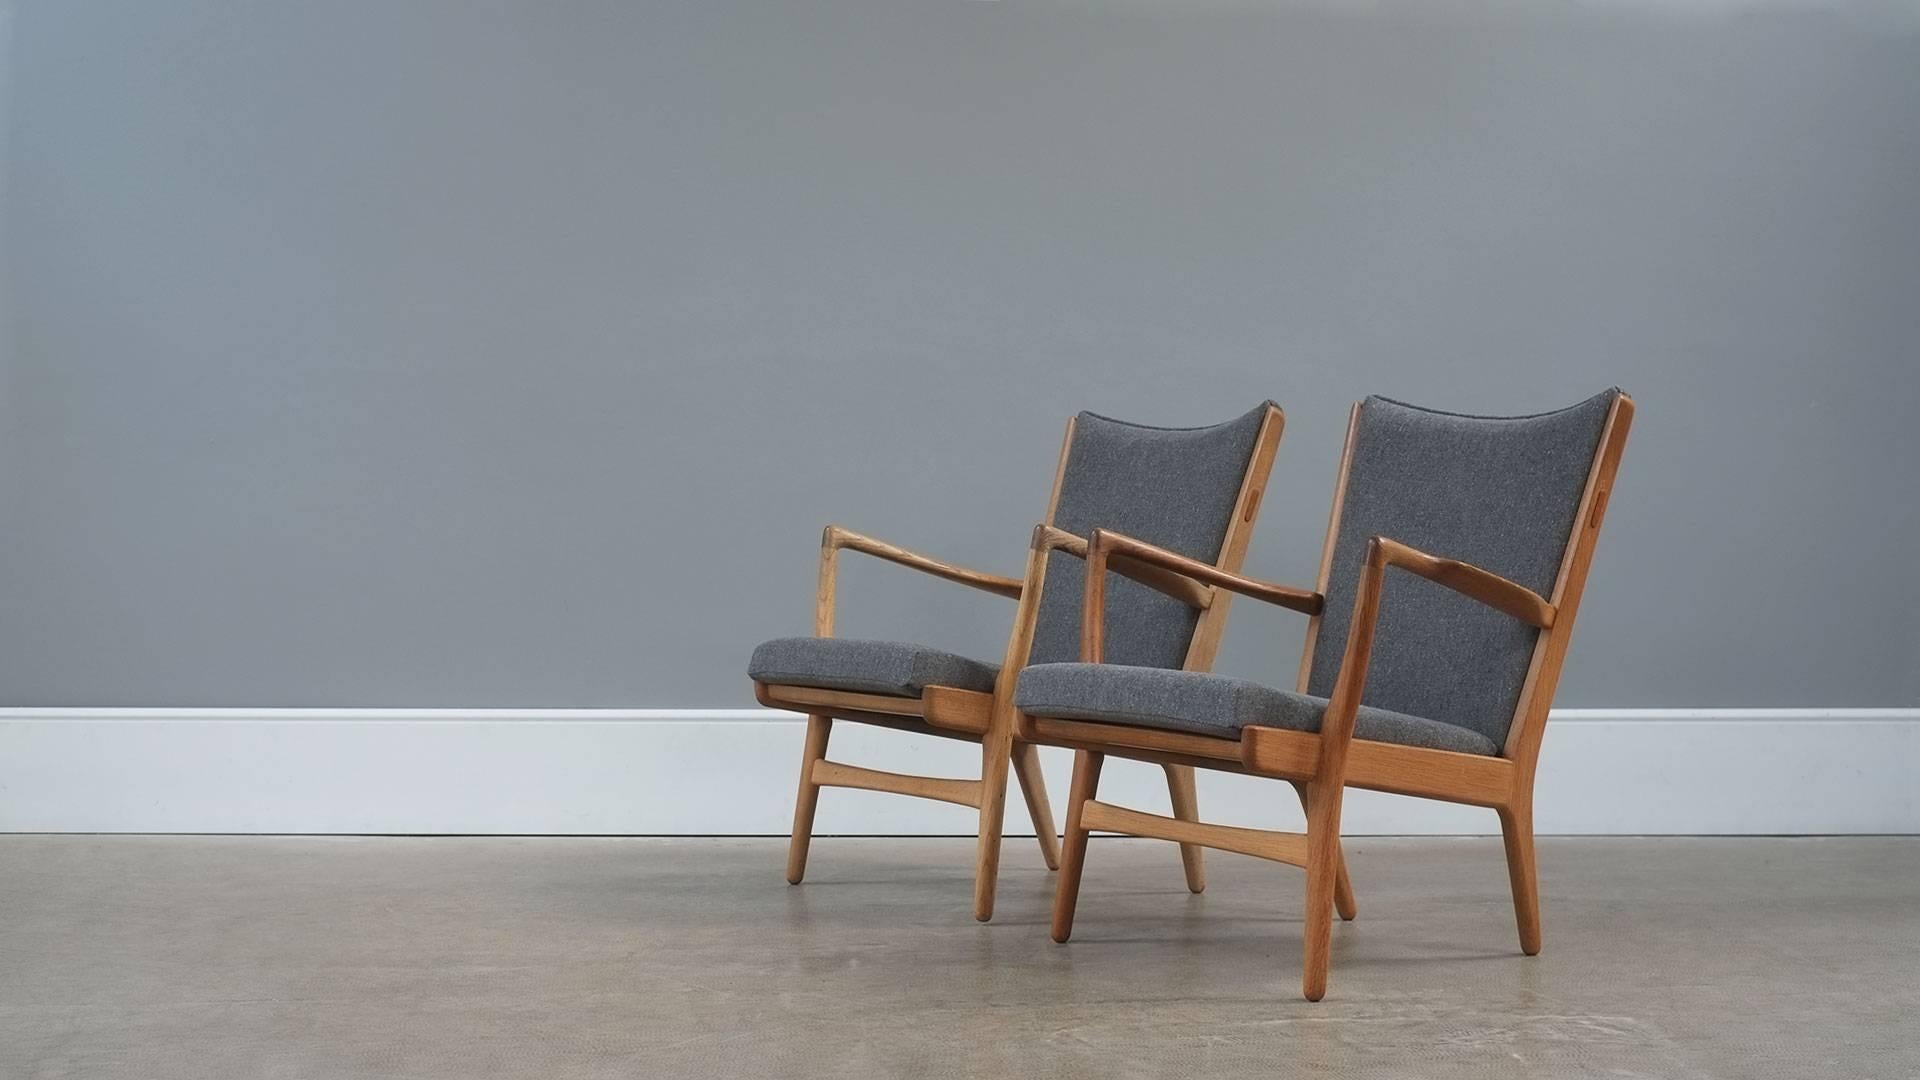 Amazing original pair of rare AP16 lounge chairs in solid oak designed by Hans Wegner for Cabinetmakers AP Stolen, Denmark. Fully reconditioned and re-upholstered in beautiful grey ‘Fleck’ fabric. Wonderful chairs.